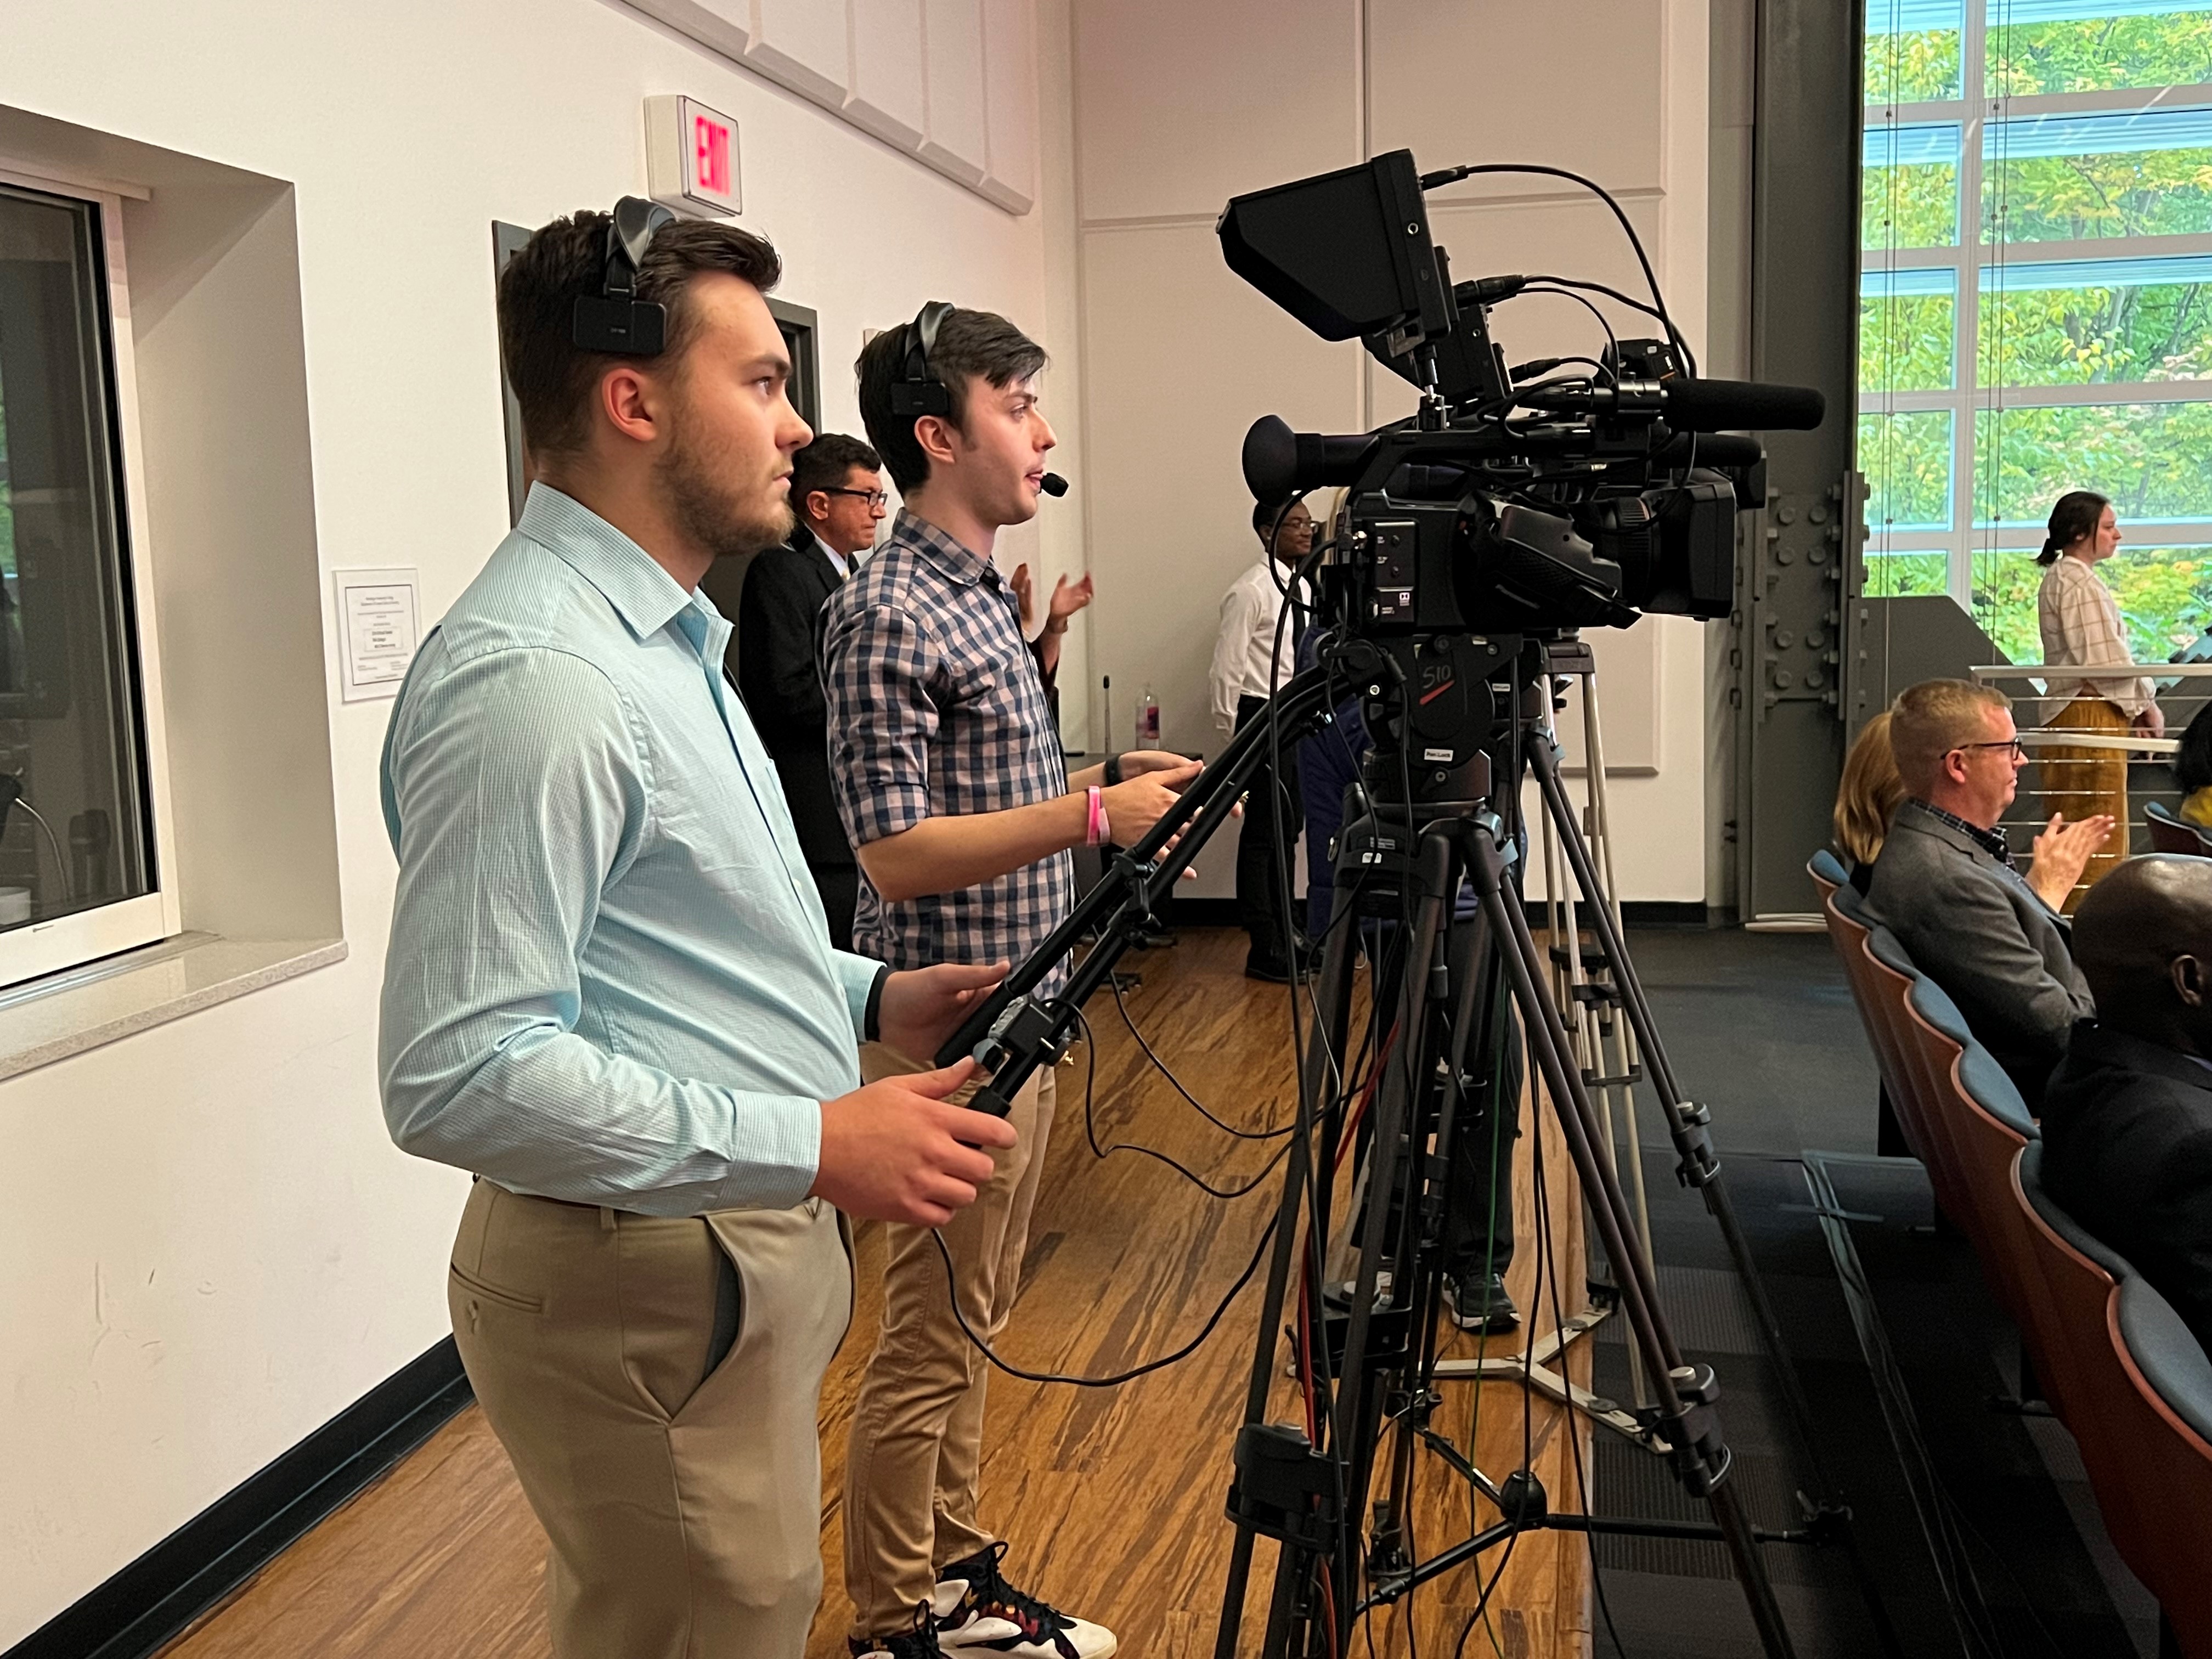 OCC students operating cameras for the livestream were Eric Shear (left) and Kyle Goff (right).